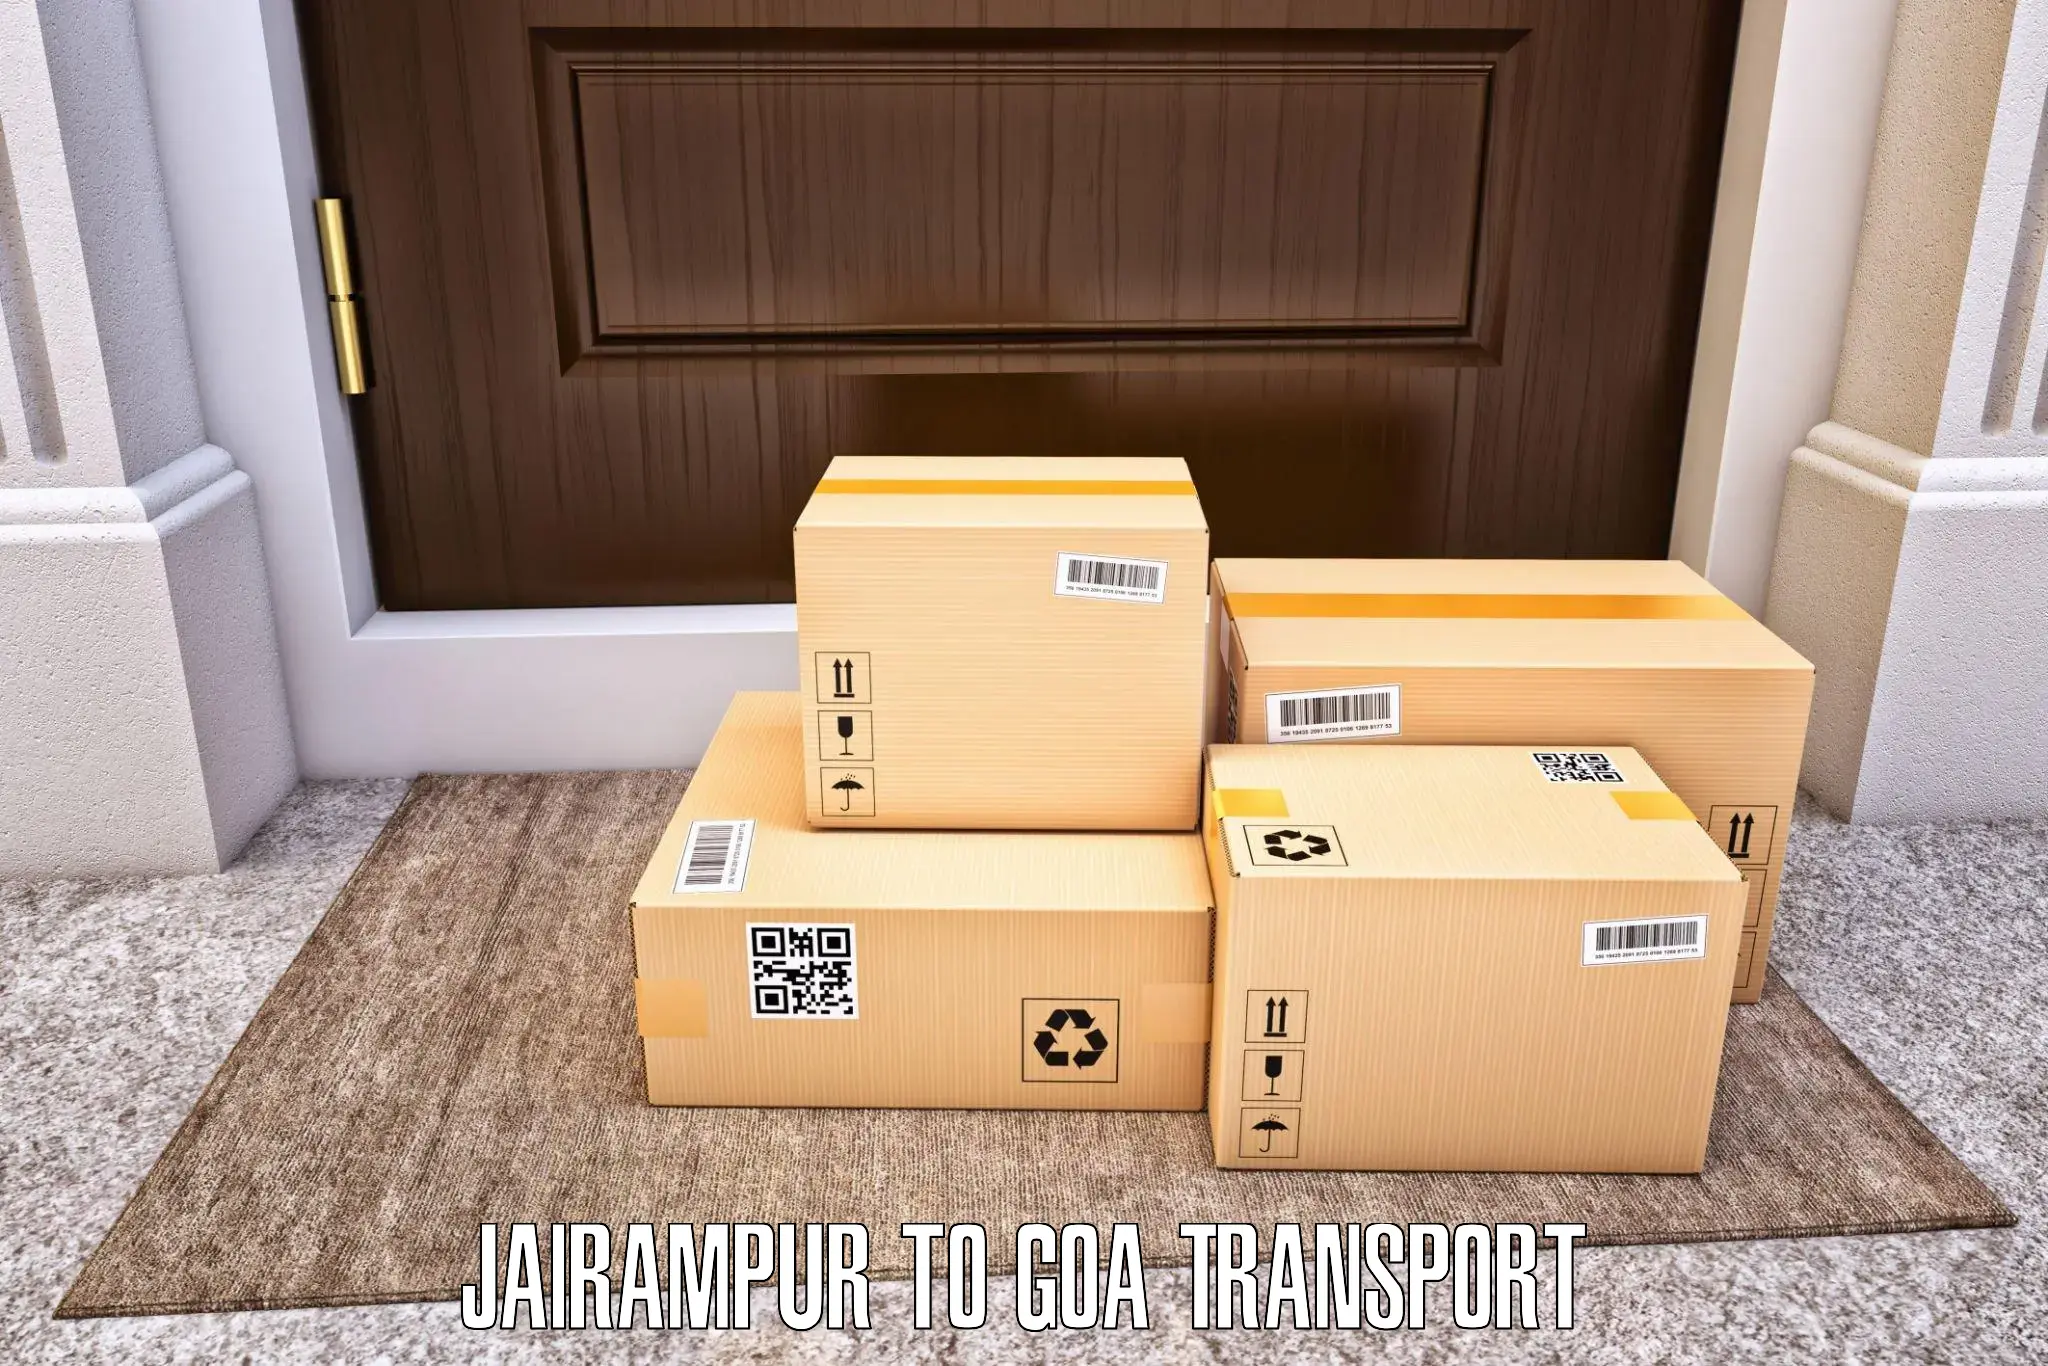 Scooty transport charges Jairampur to Goa University